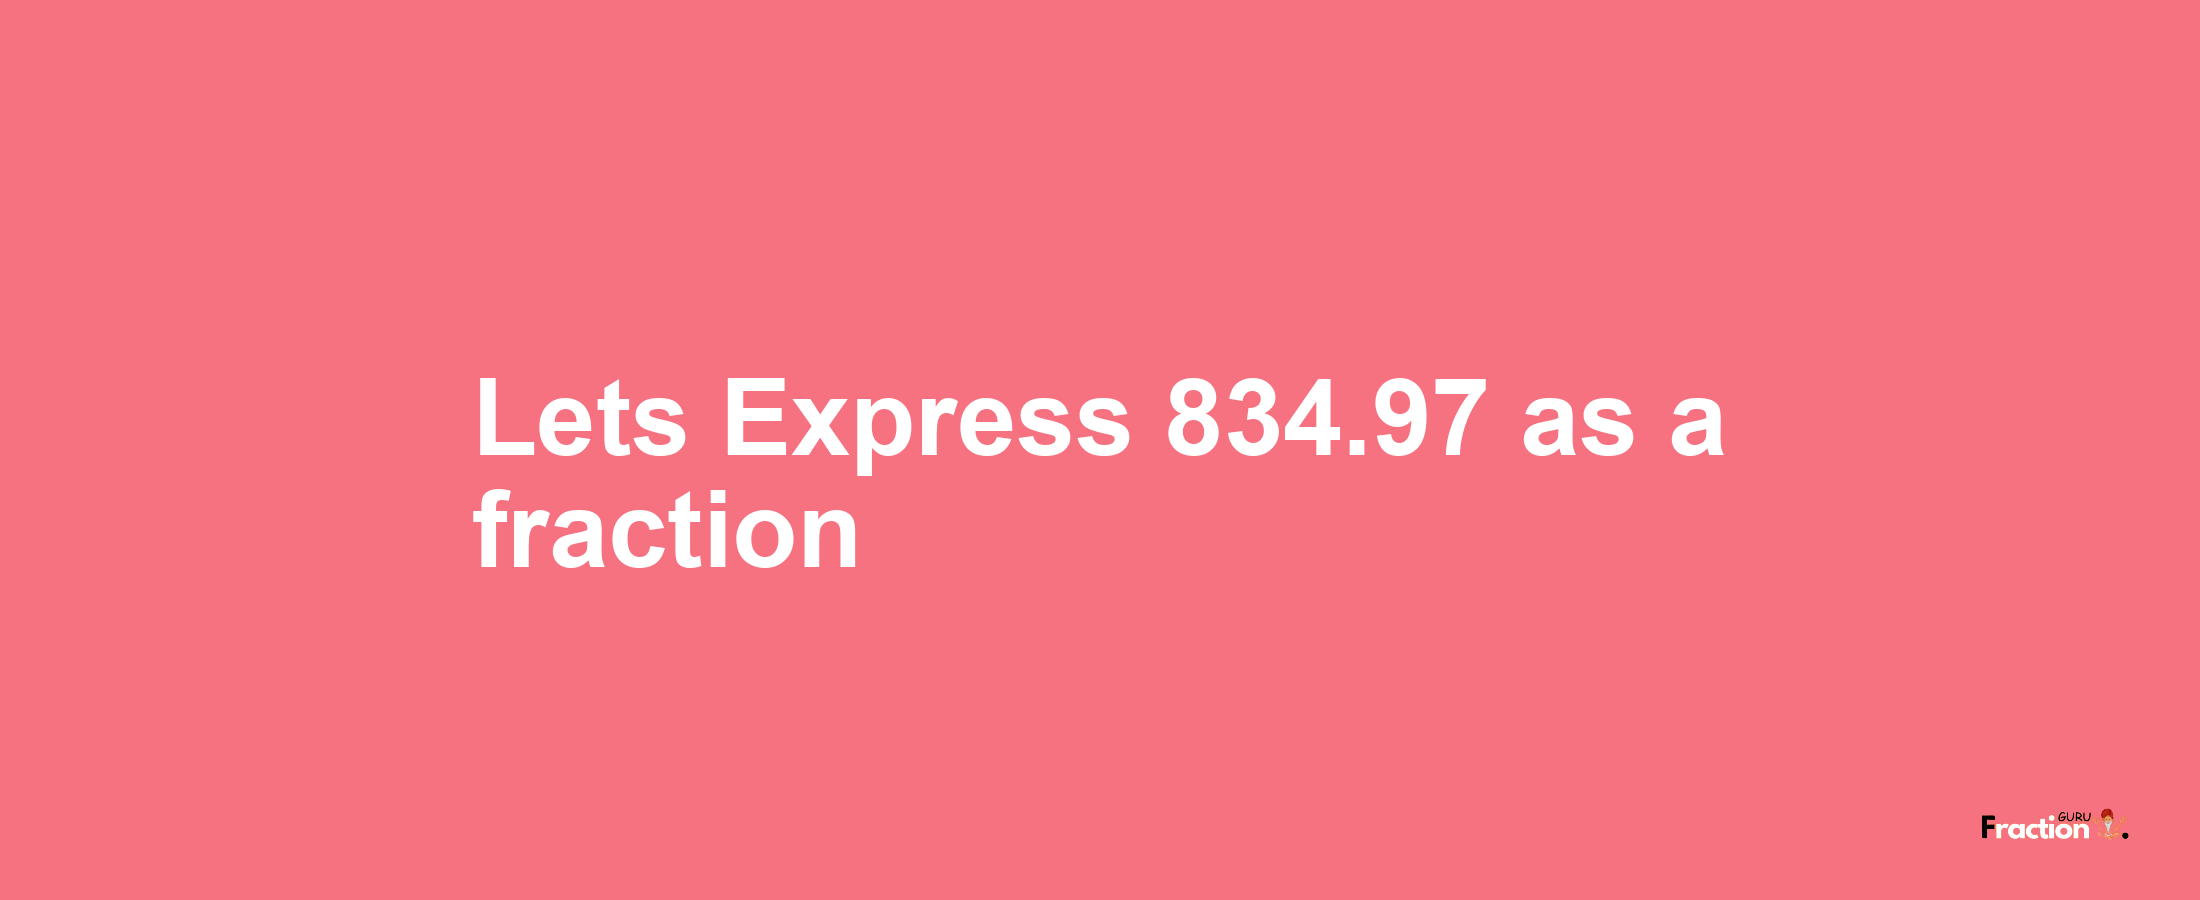 Lets Express 834.97 as afraction